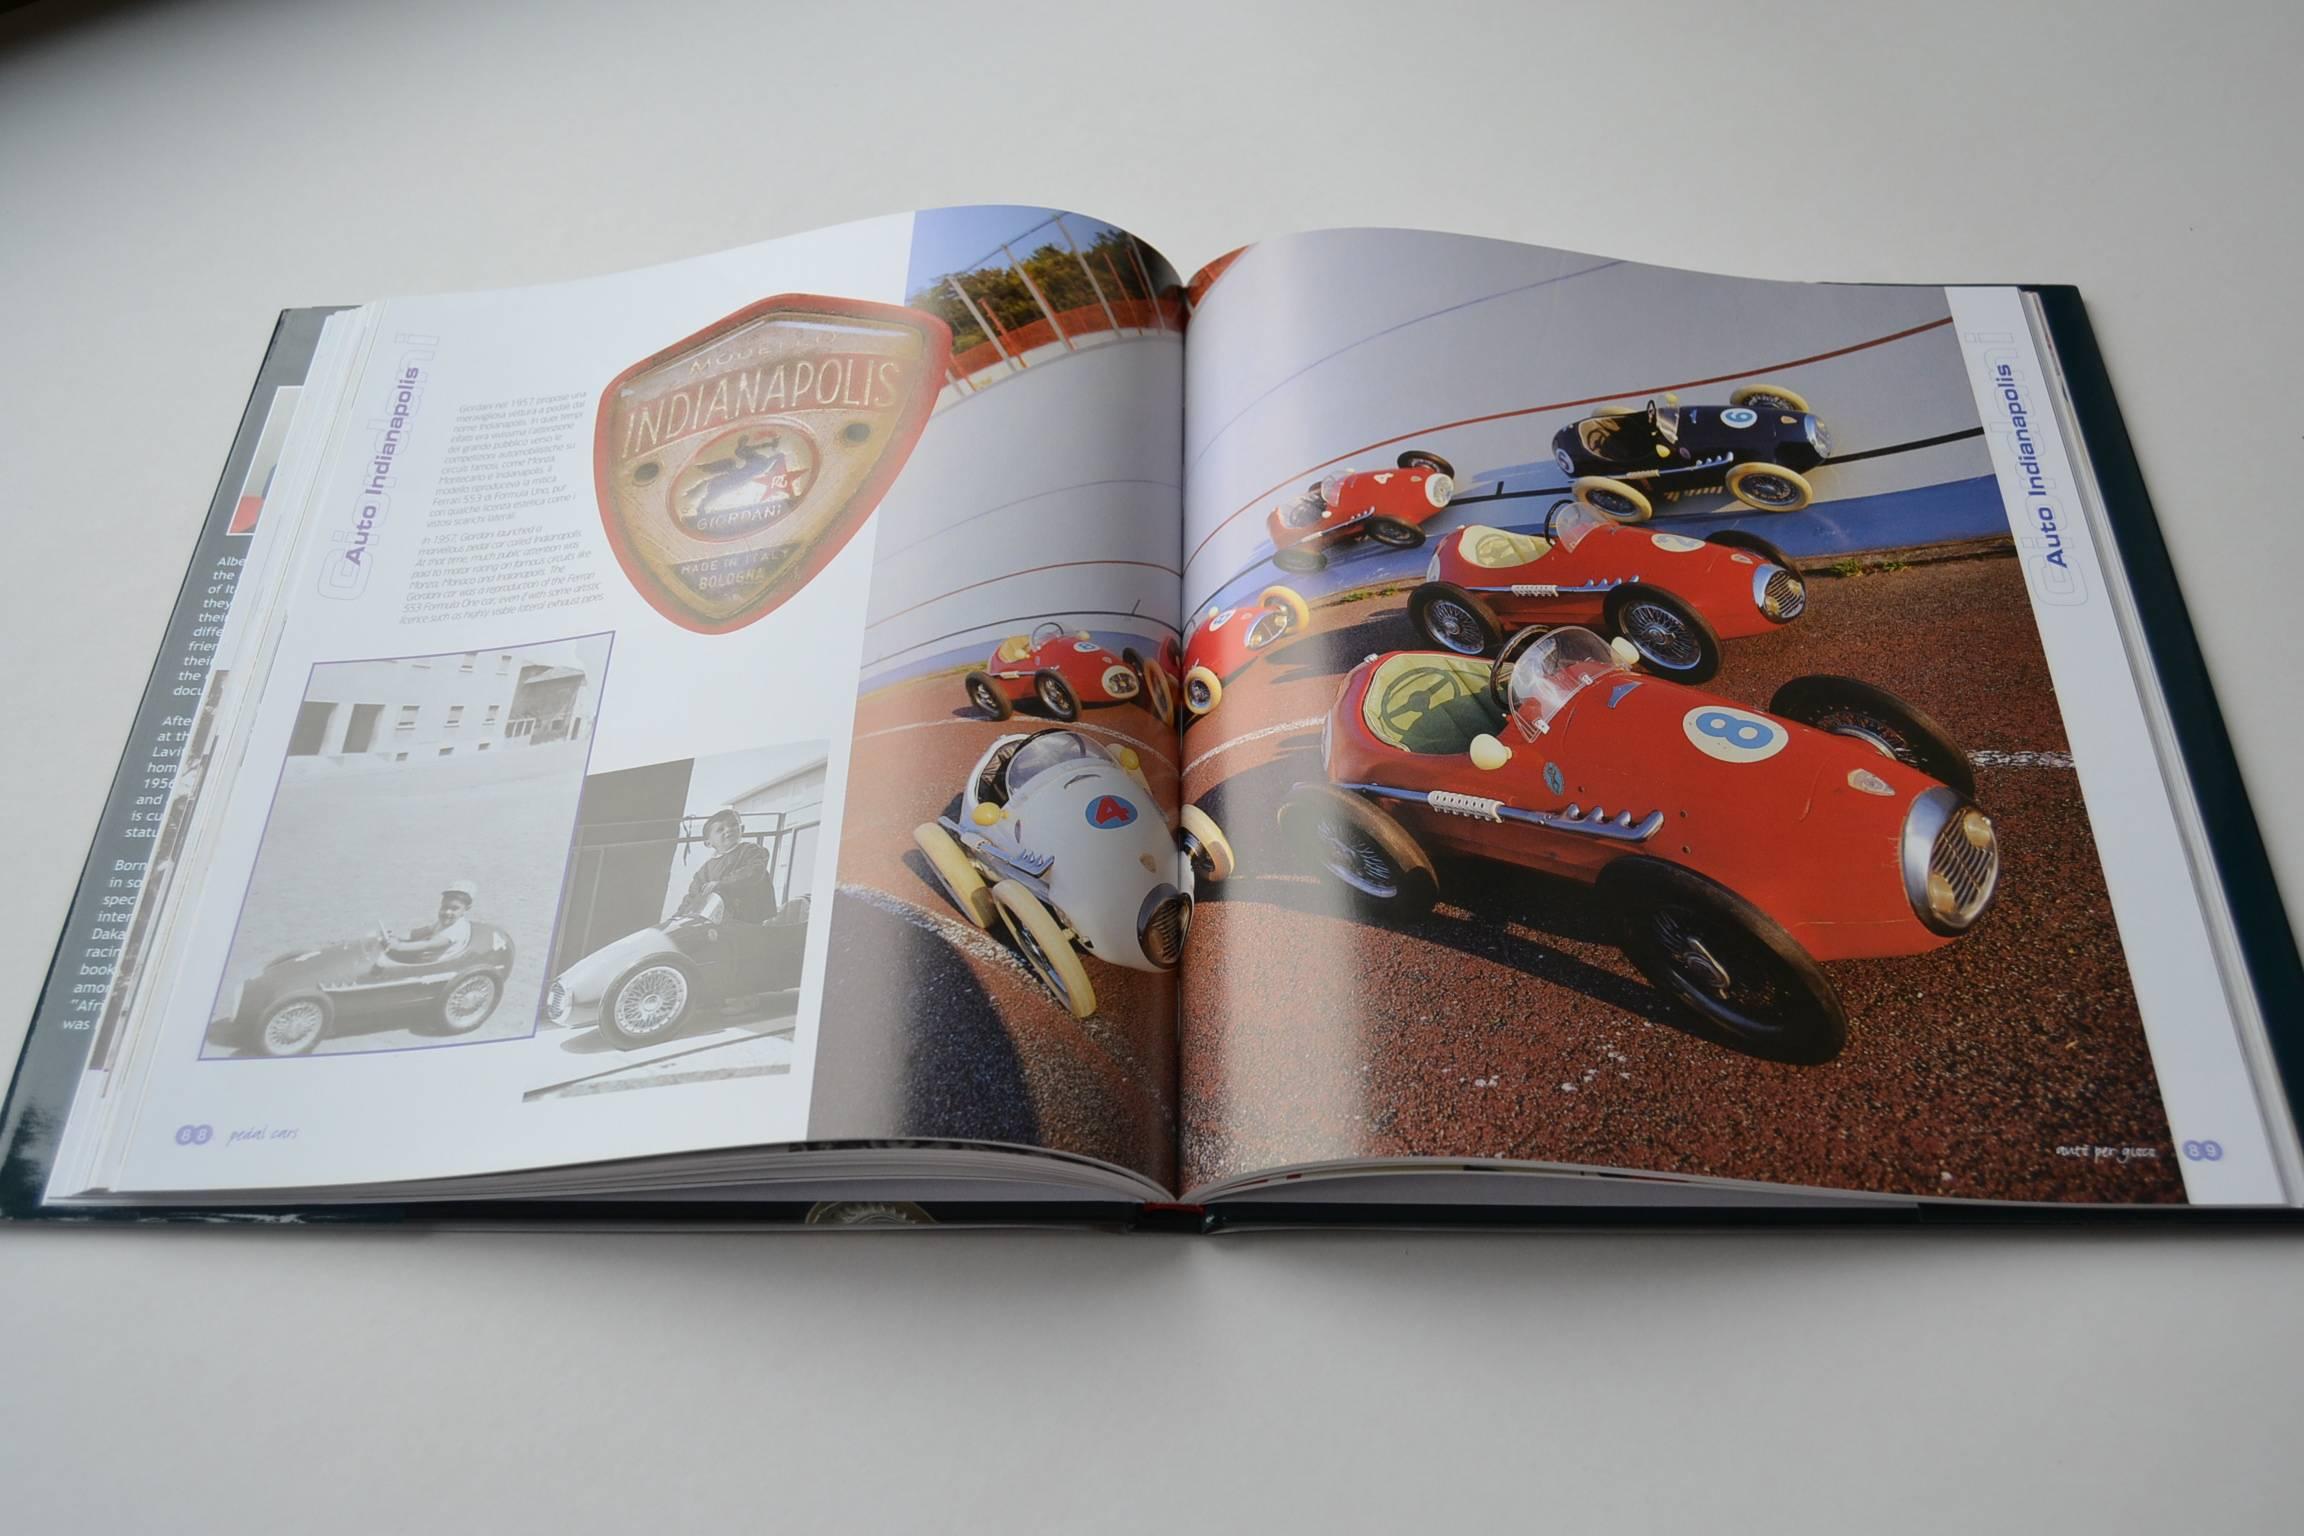 If you like Italian pedal cars, you should own this book!

Pedal Cars Story of Italian Pedal Cars and Others.
Nice pictures, descriptions and history of  the different models of the famous Giordani pedal cars : 
Giordani Indianapolis , Giordani